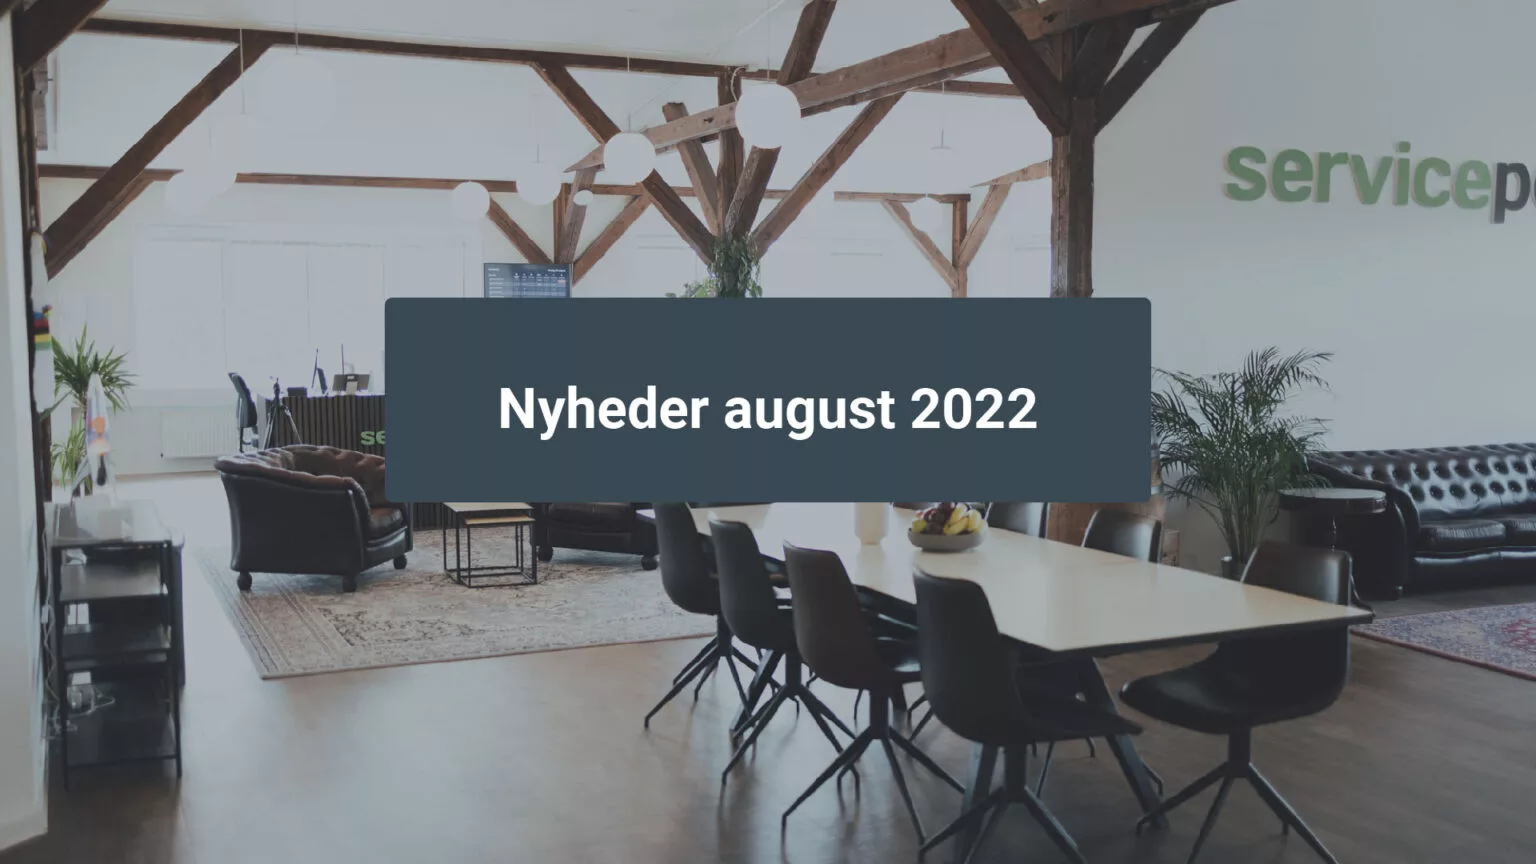 Nyheder august